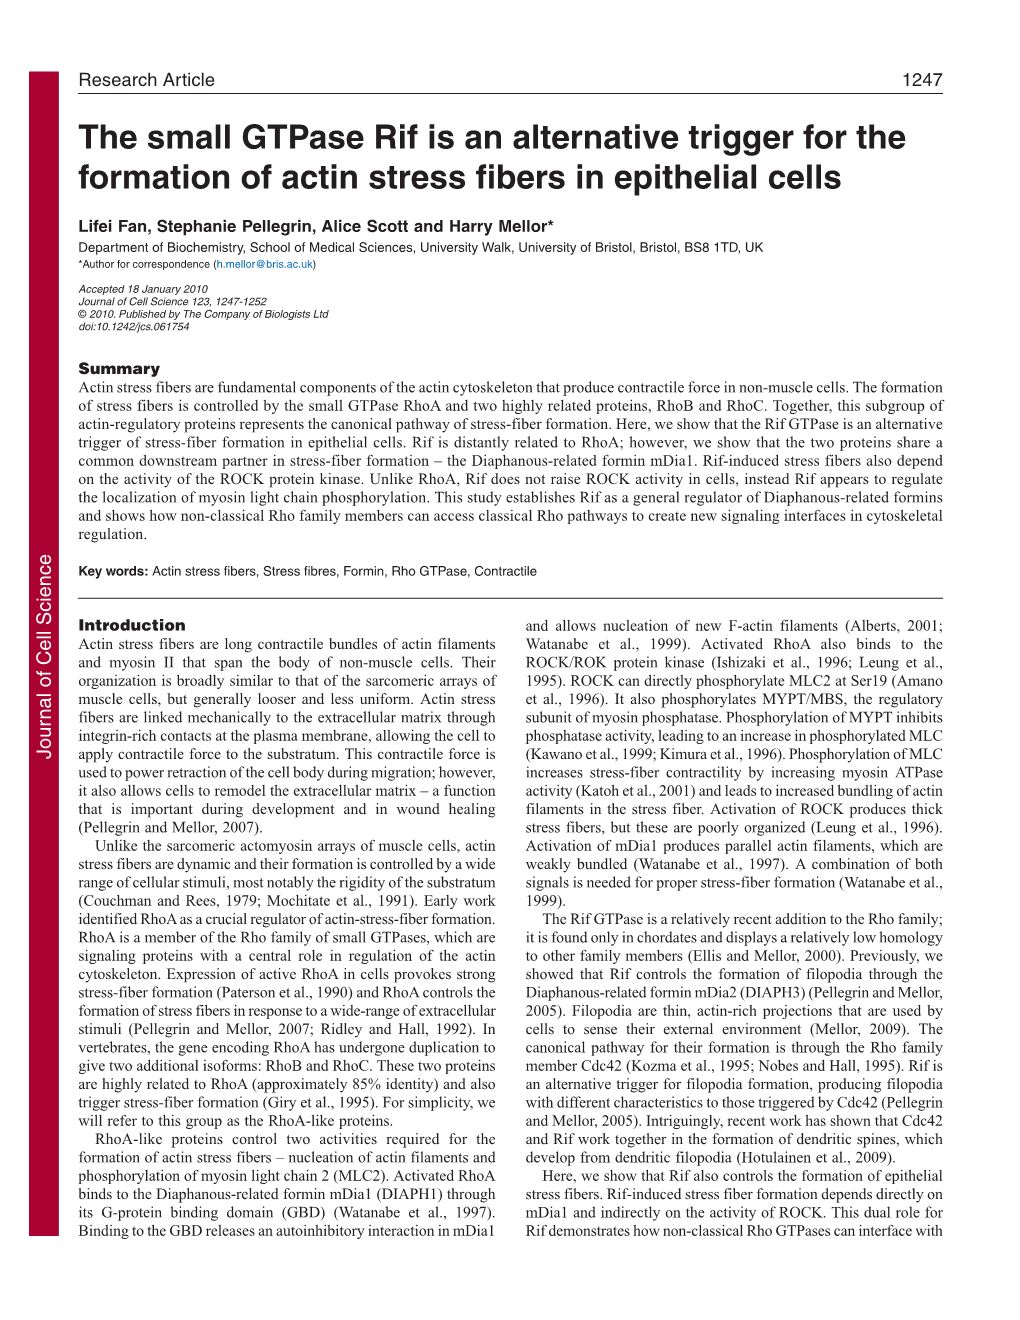 The Small Gtpase Rif Is an Alternative Trigger for the Formation of Actin Stress Fibers in Epithelial Cells